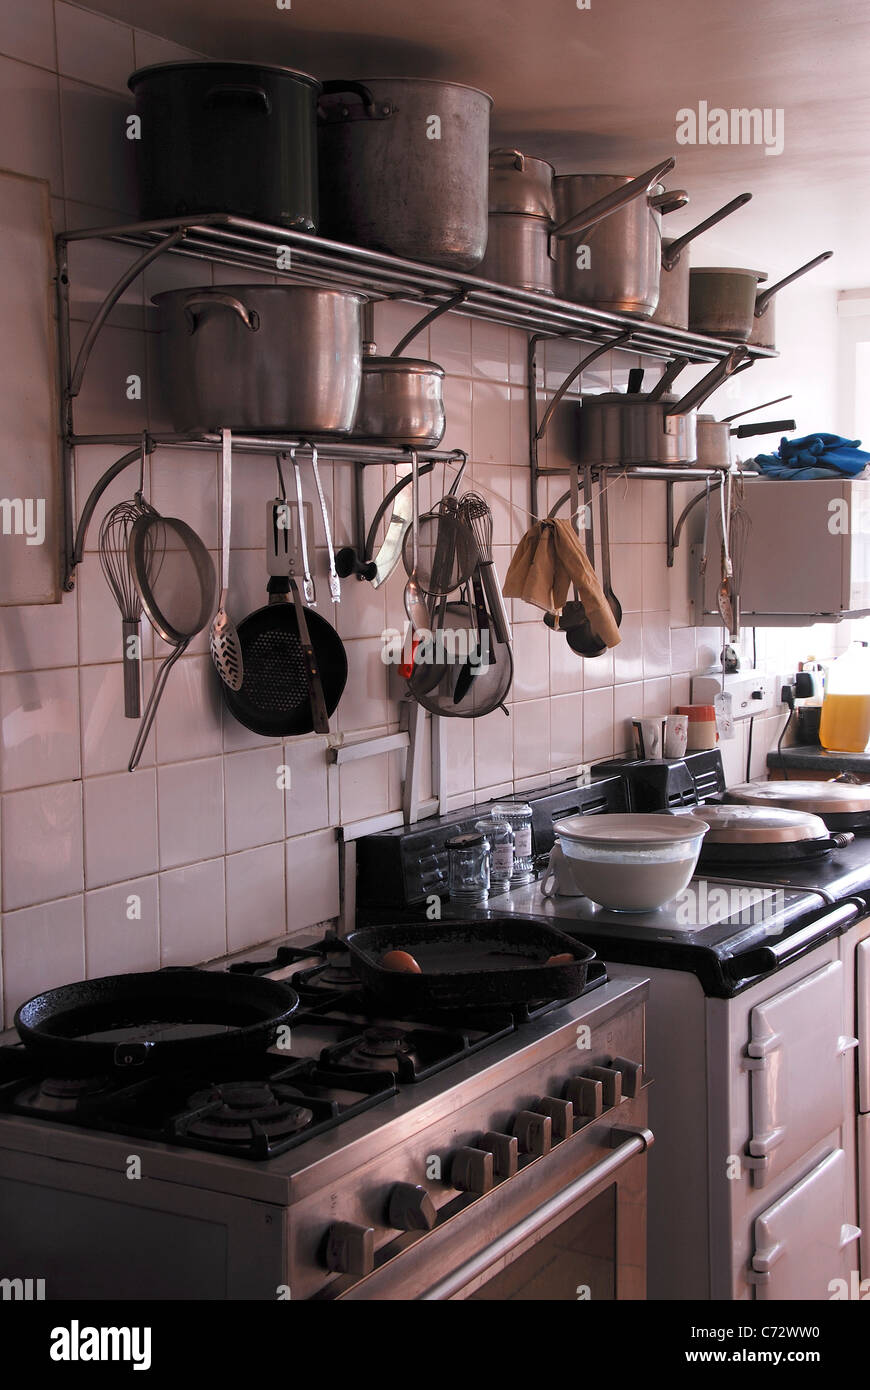 A kitchen with cooking appliances and utensils UK Stock Photo